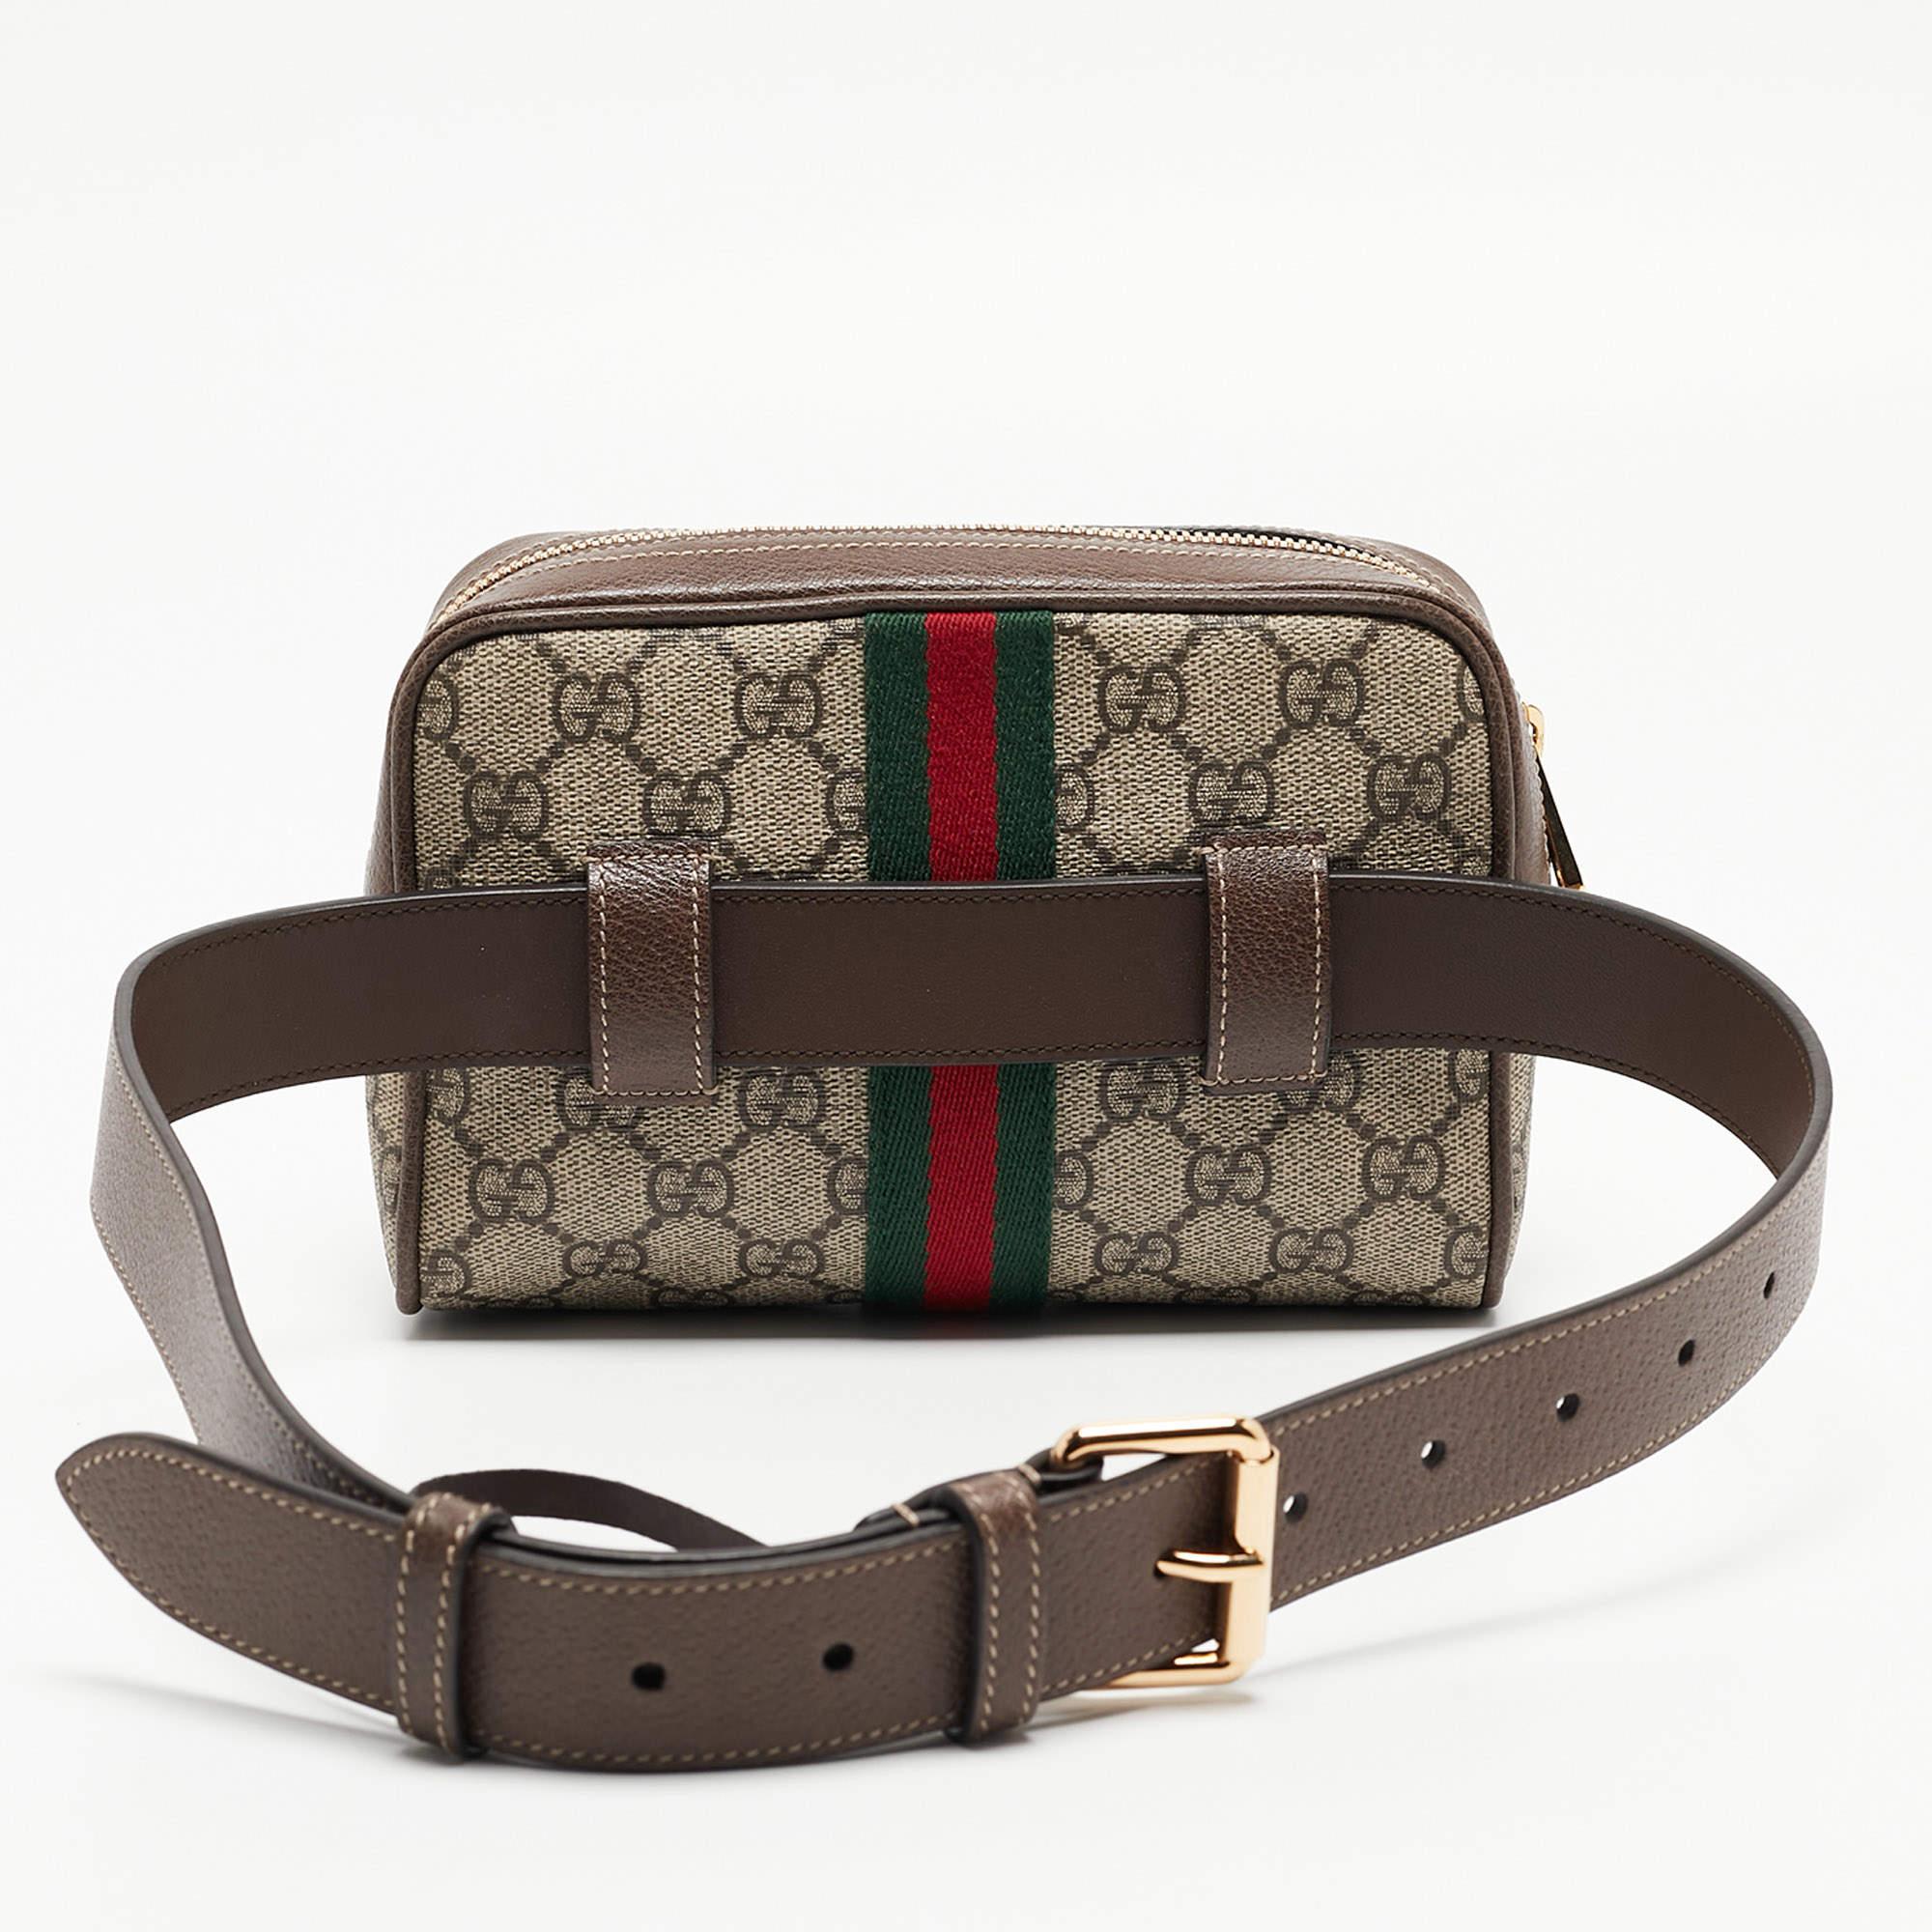 Every creation from Gucci is noteworthy for its timeless charm and versatile design. Created from GG Supreme canvas and leather, this Gucci Ophidia belt bag is imbued with heritage details. The Web stripe detailing and the branded motif on the front